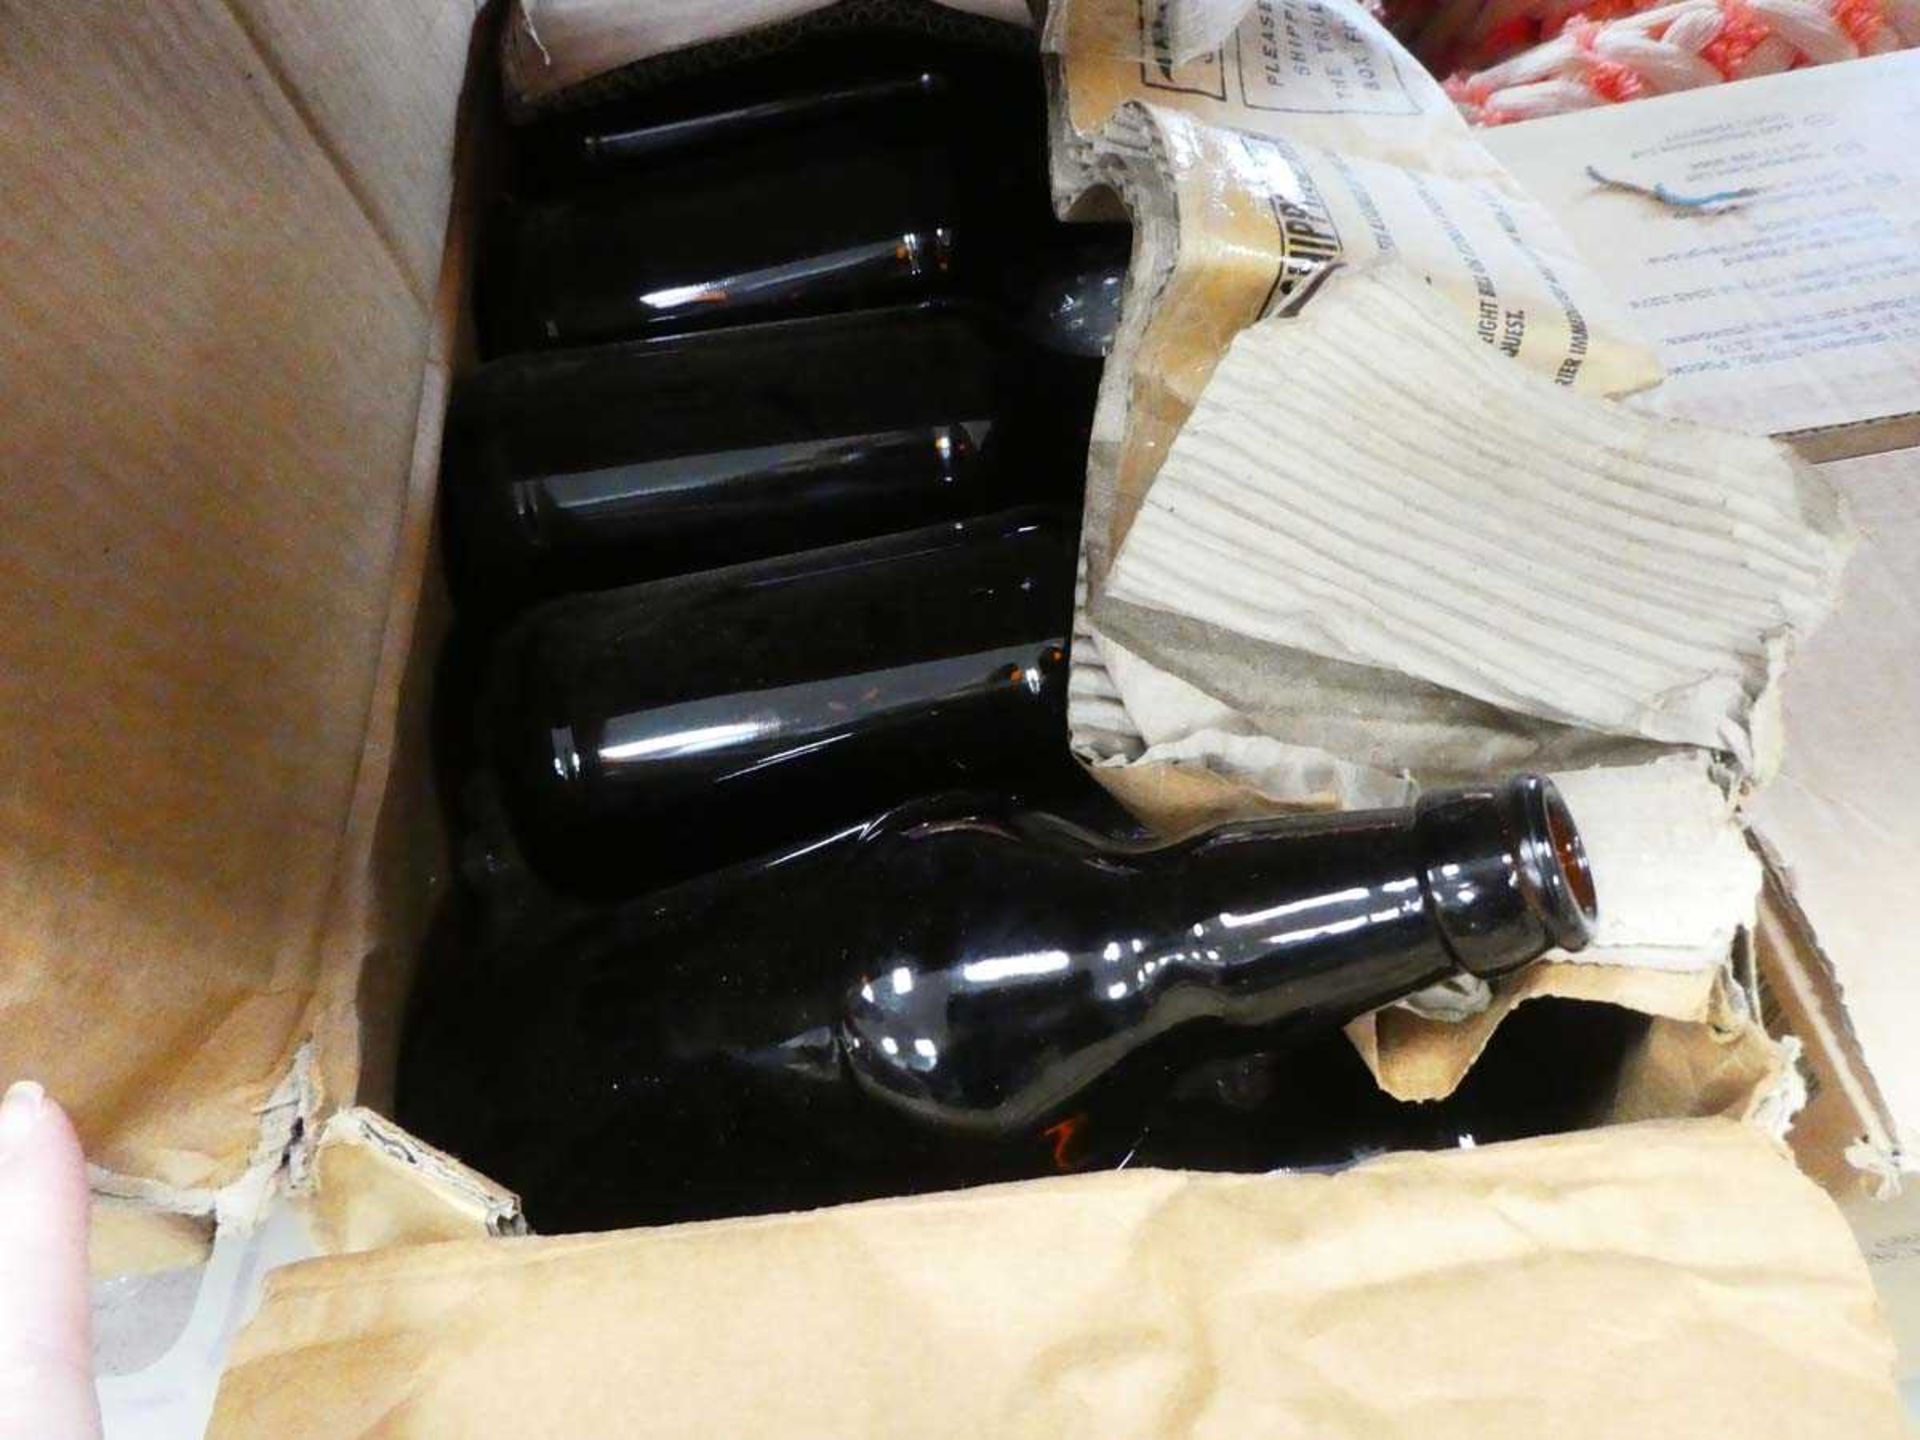 2 boxes containing glass bottles